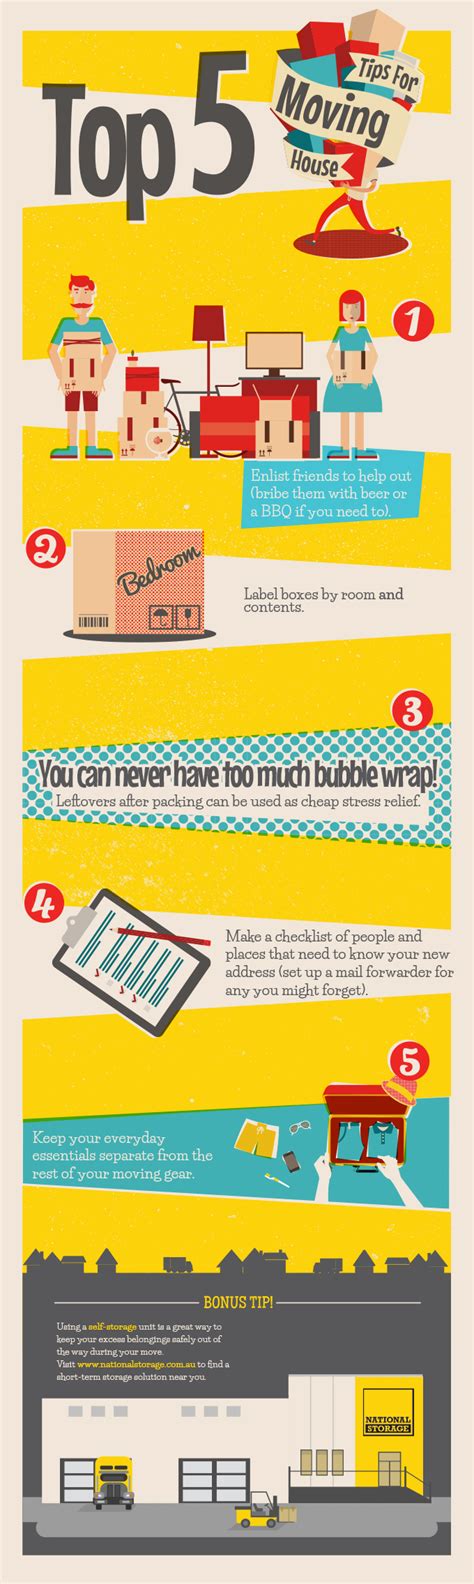 Infographic Top 5 Tips For Moving House National Storage